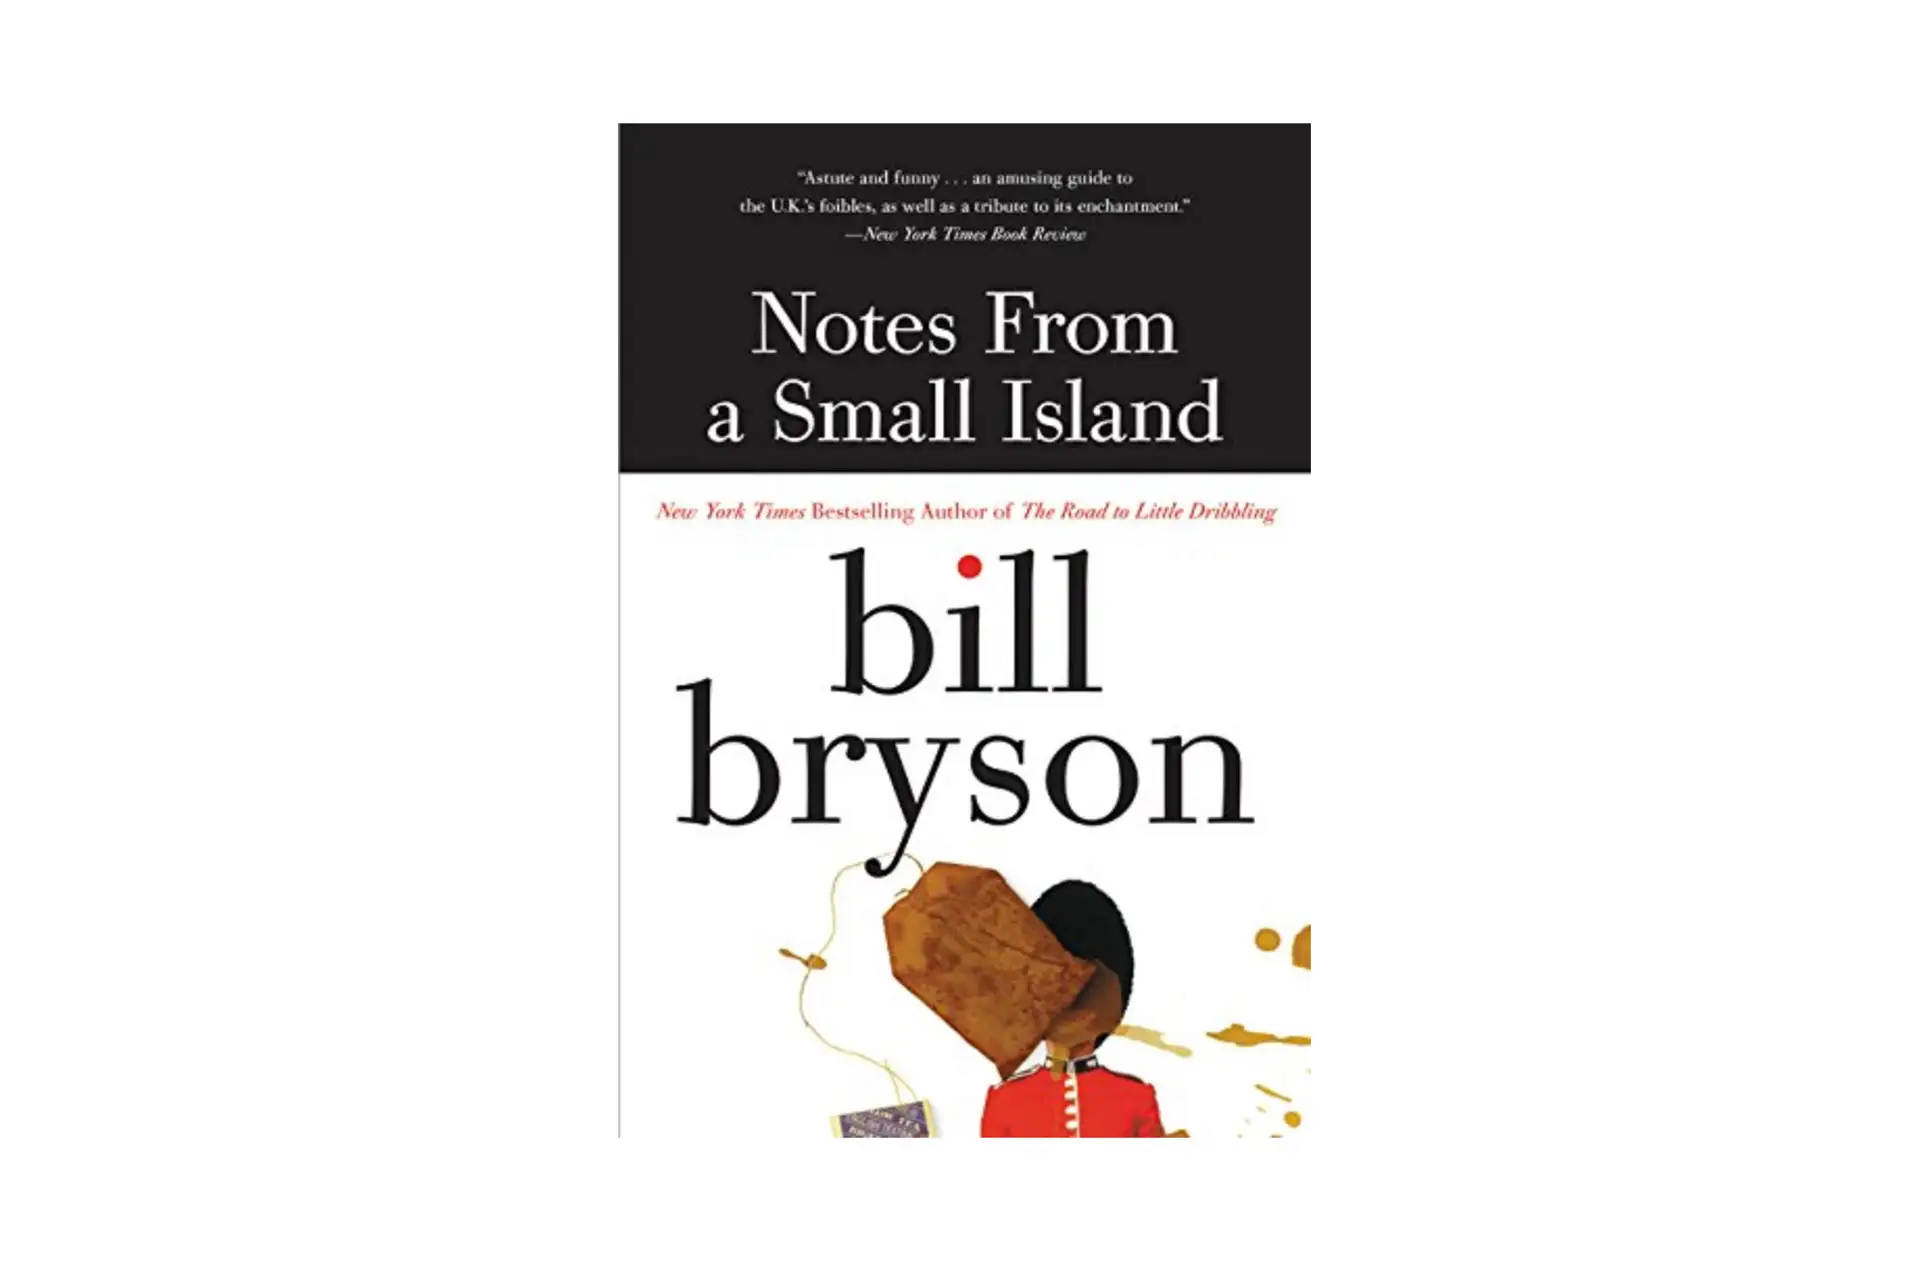 Notes From a Small Island Book; Courtesy of Amazon